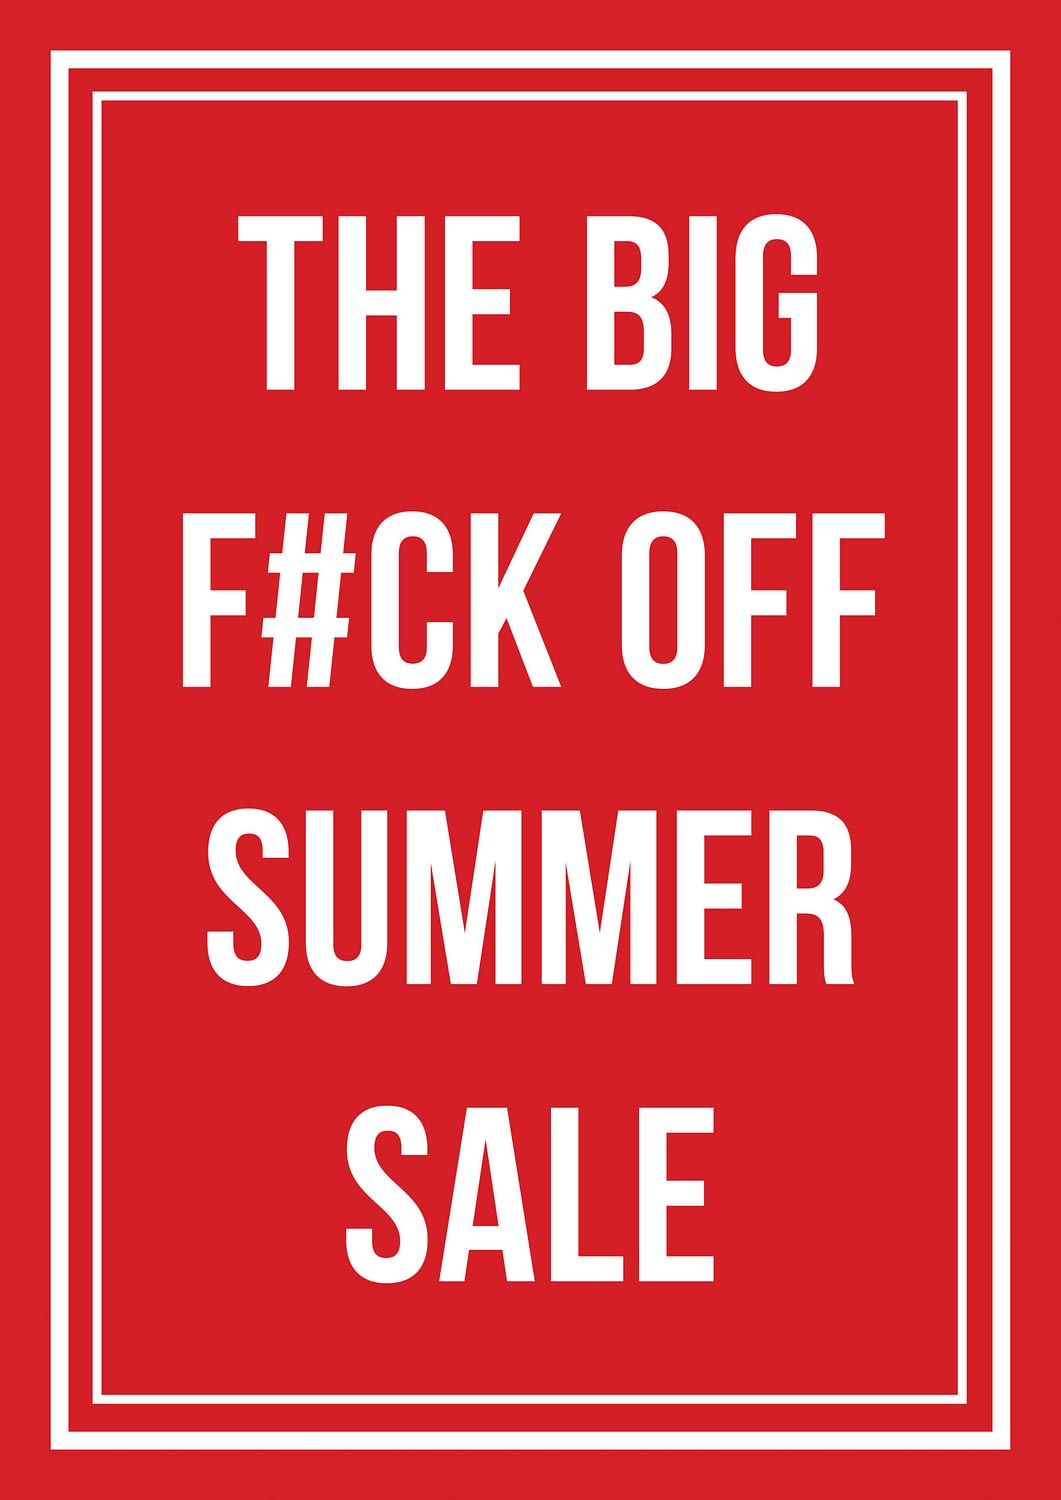 You are currently viewing THE BIG SUMMER SALE